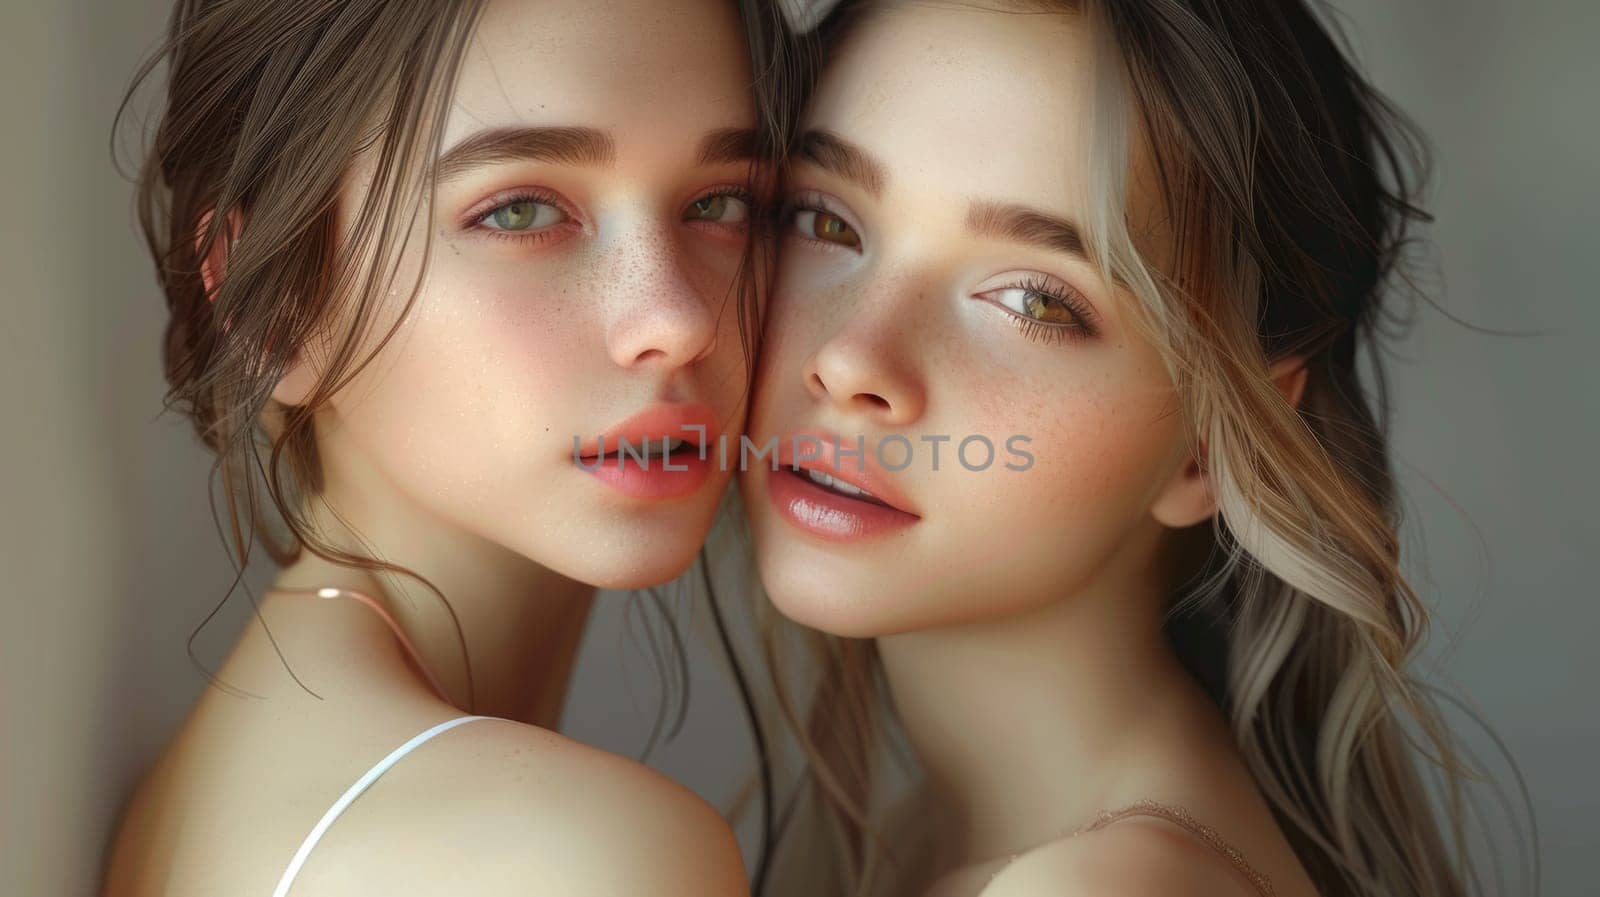 Two young women are posing for a picture together